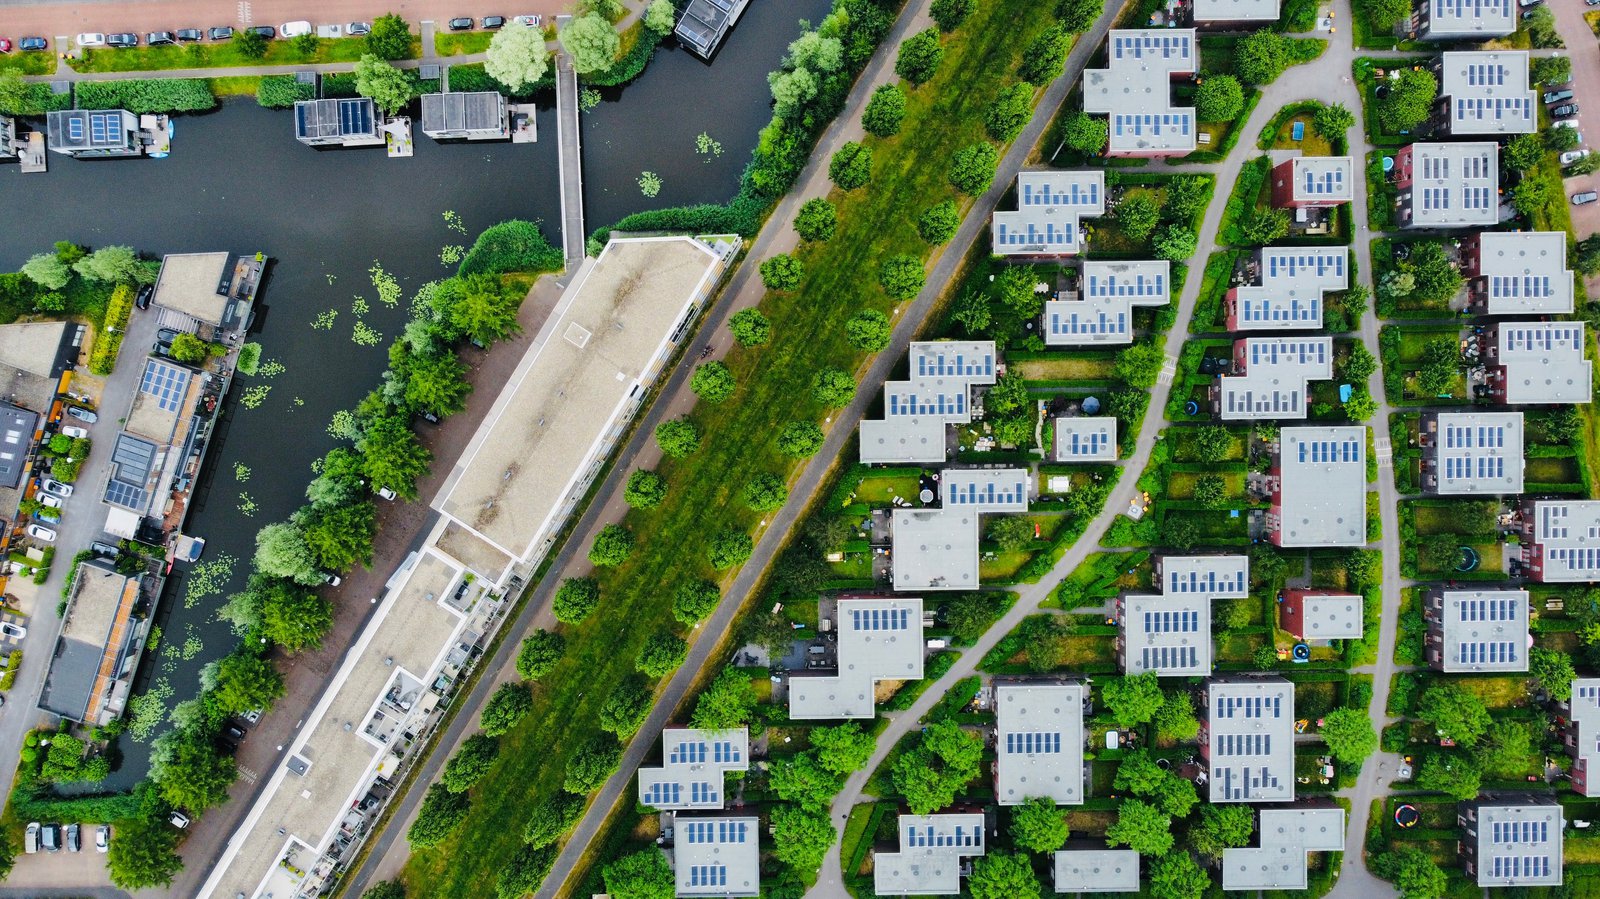 Aerial shot of housing development surrounded by greenery